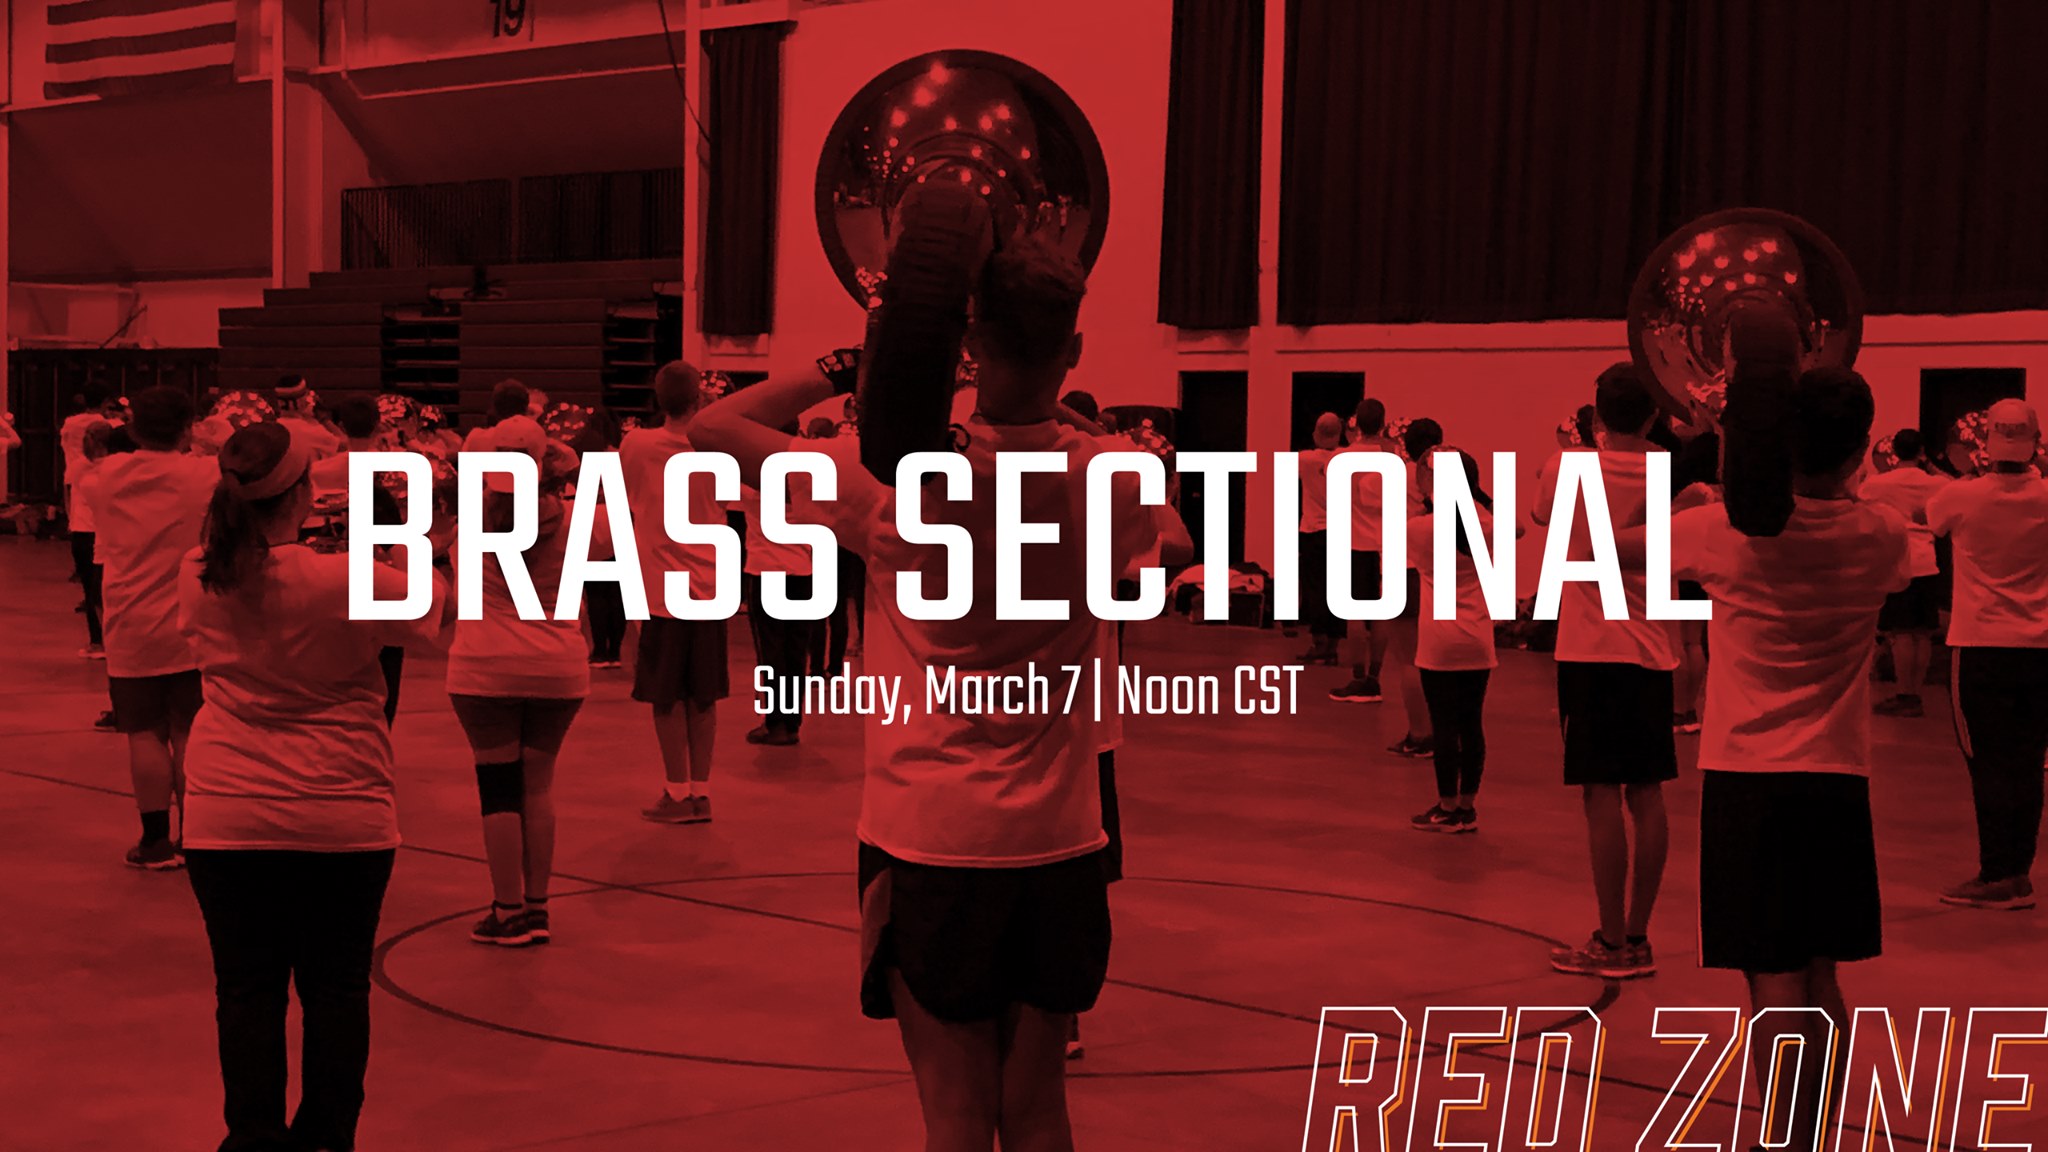 Brass Sectional; Sunday, March 7 at Noon CST